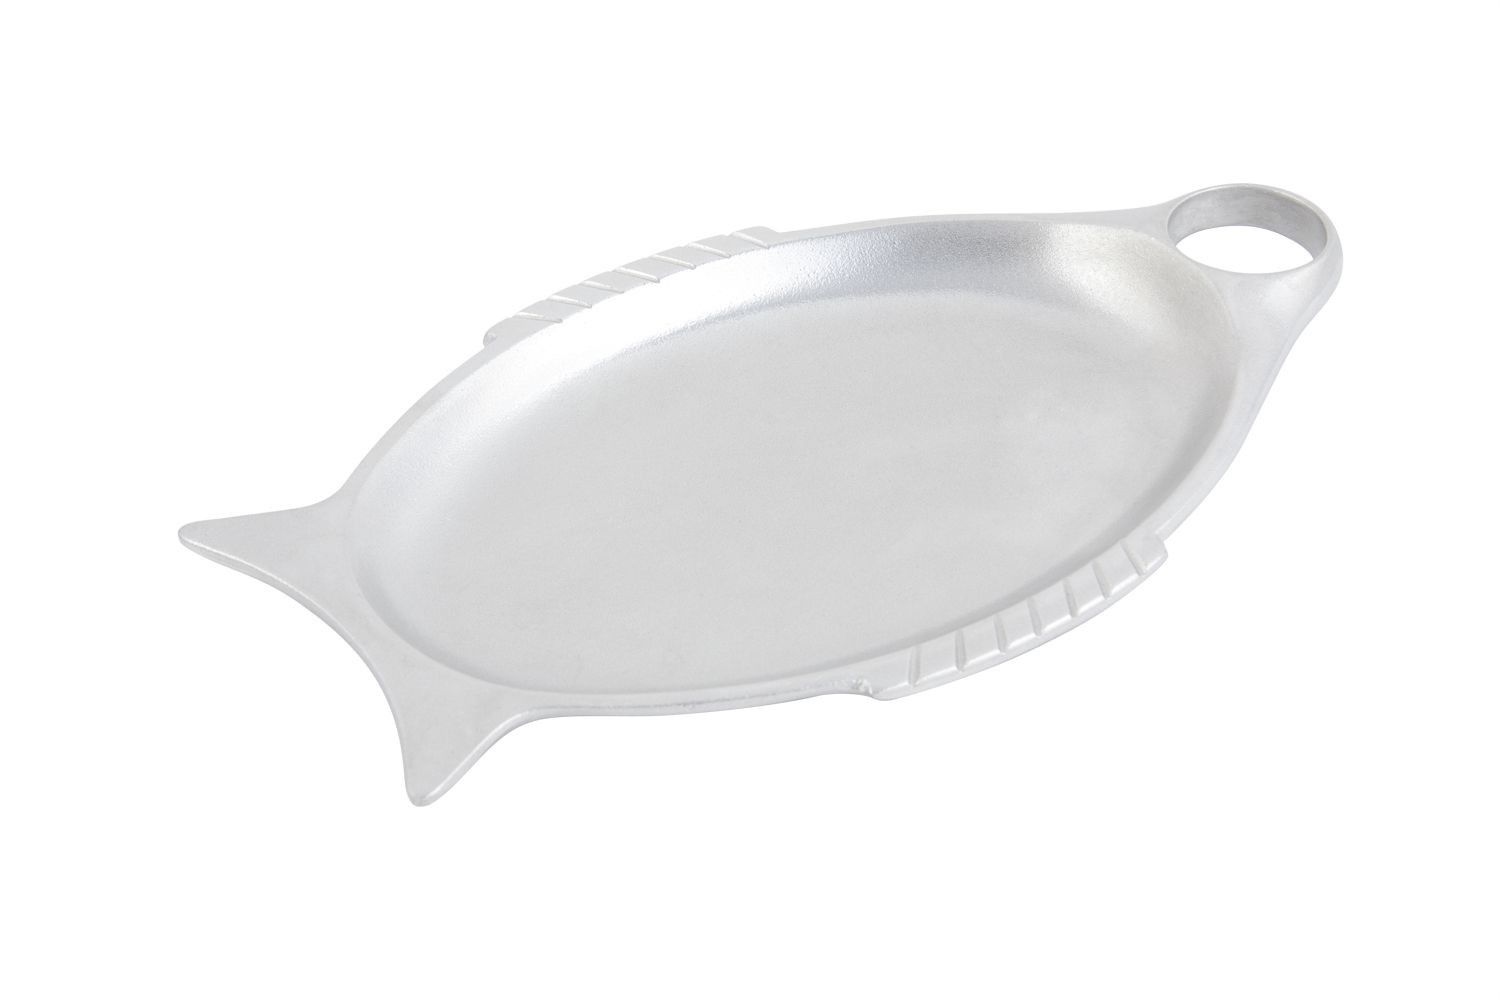 Bon Chef 2035P Fish-Shaped Platter with Cup Holder, Pewter Glo 8 1/2" x 14 1/2", Set of 6